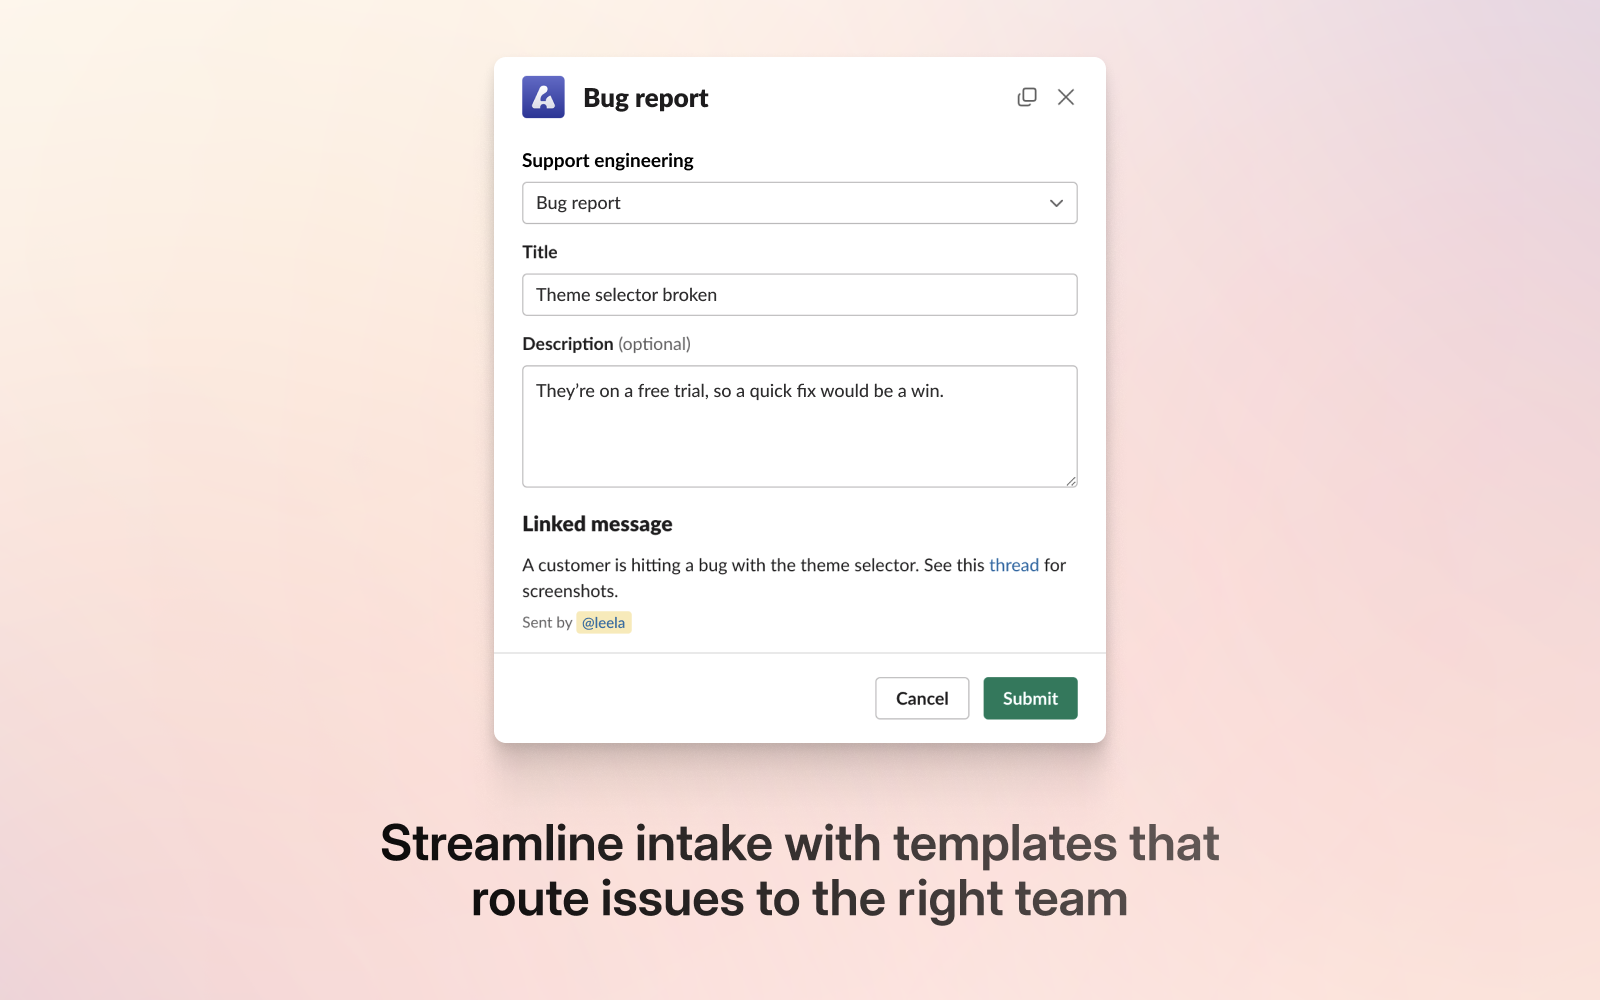 Streamline intake with templates that route issues to the right team